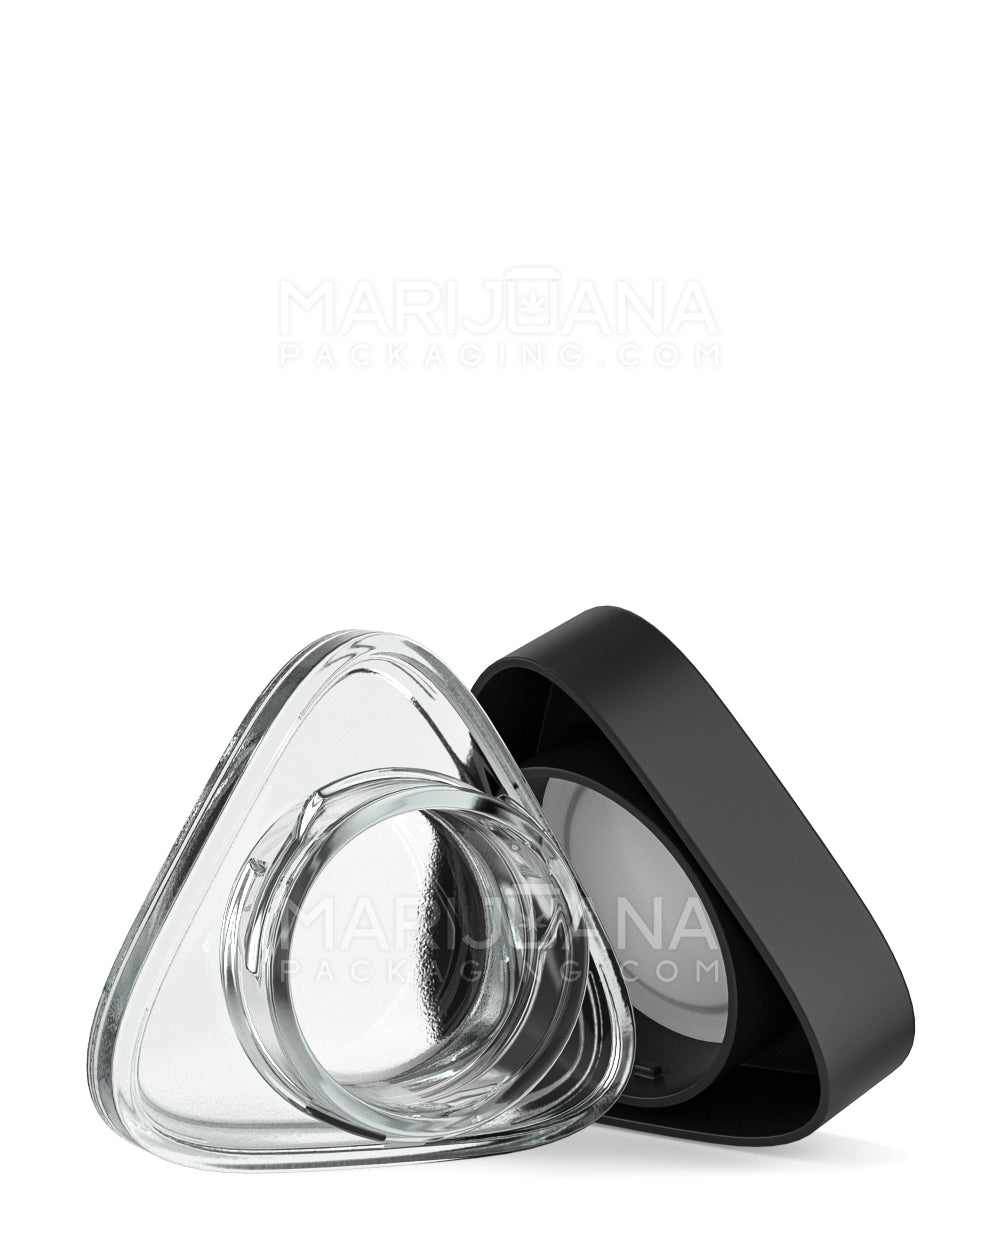 Child Resistant | Clear Glass Triangle Concentrate Jar w/ Black Cap | 24mm - 5mL - 240 Count - 1